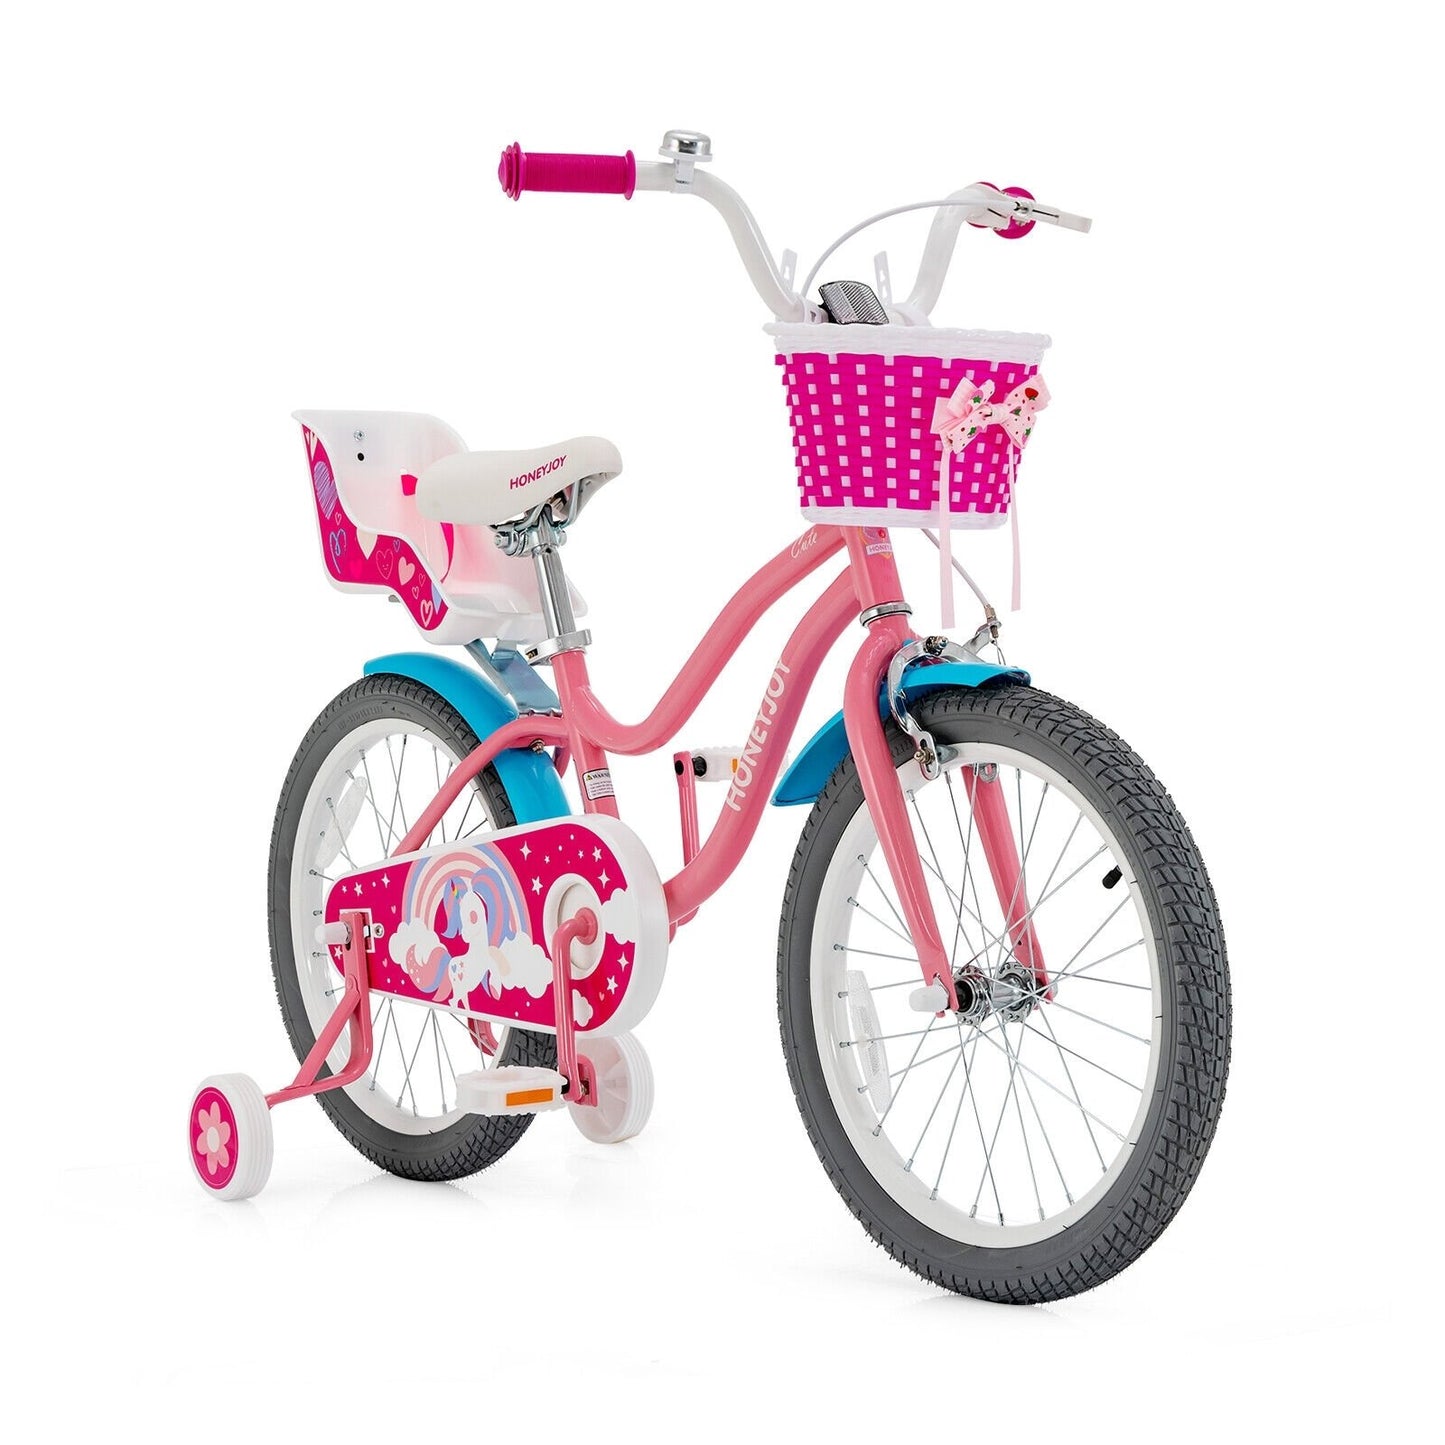 Kids Bicycle with Training Wheels and Basket for Boys and Girls Age 3-9 Years-18", Pink